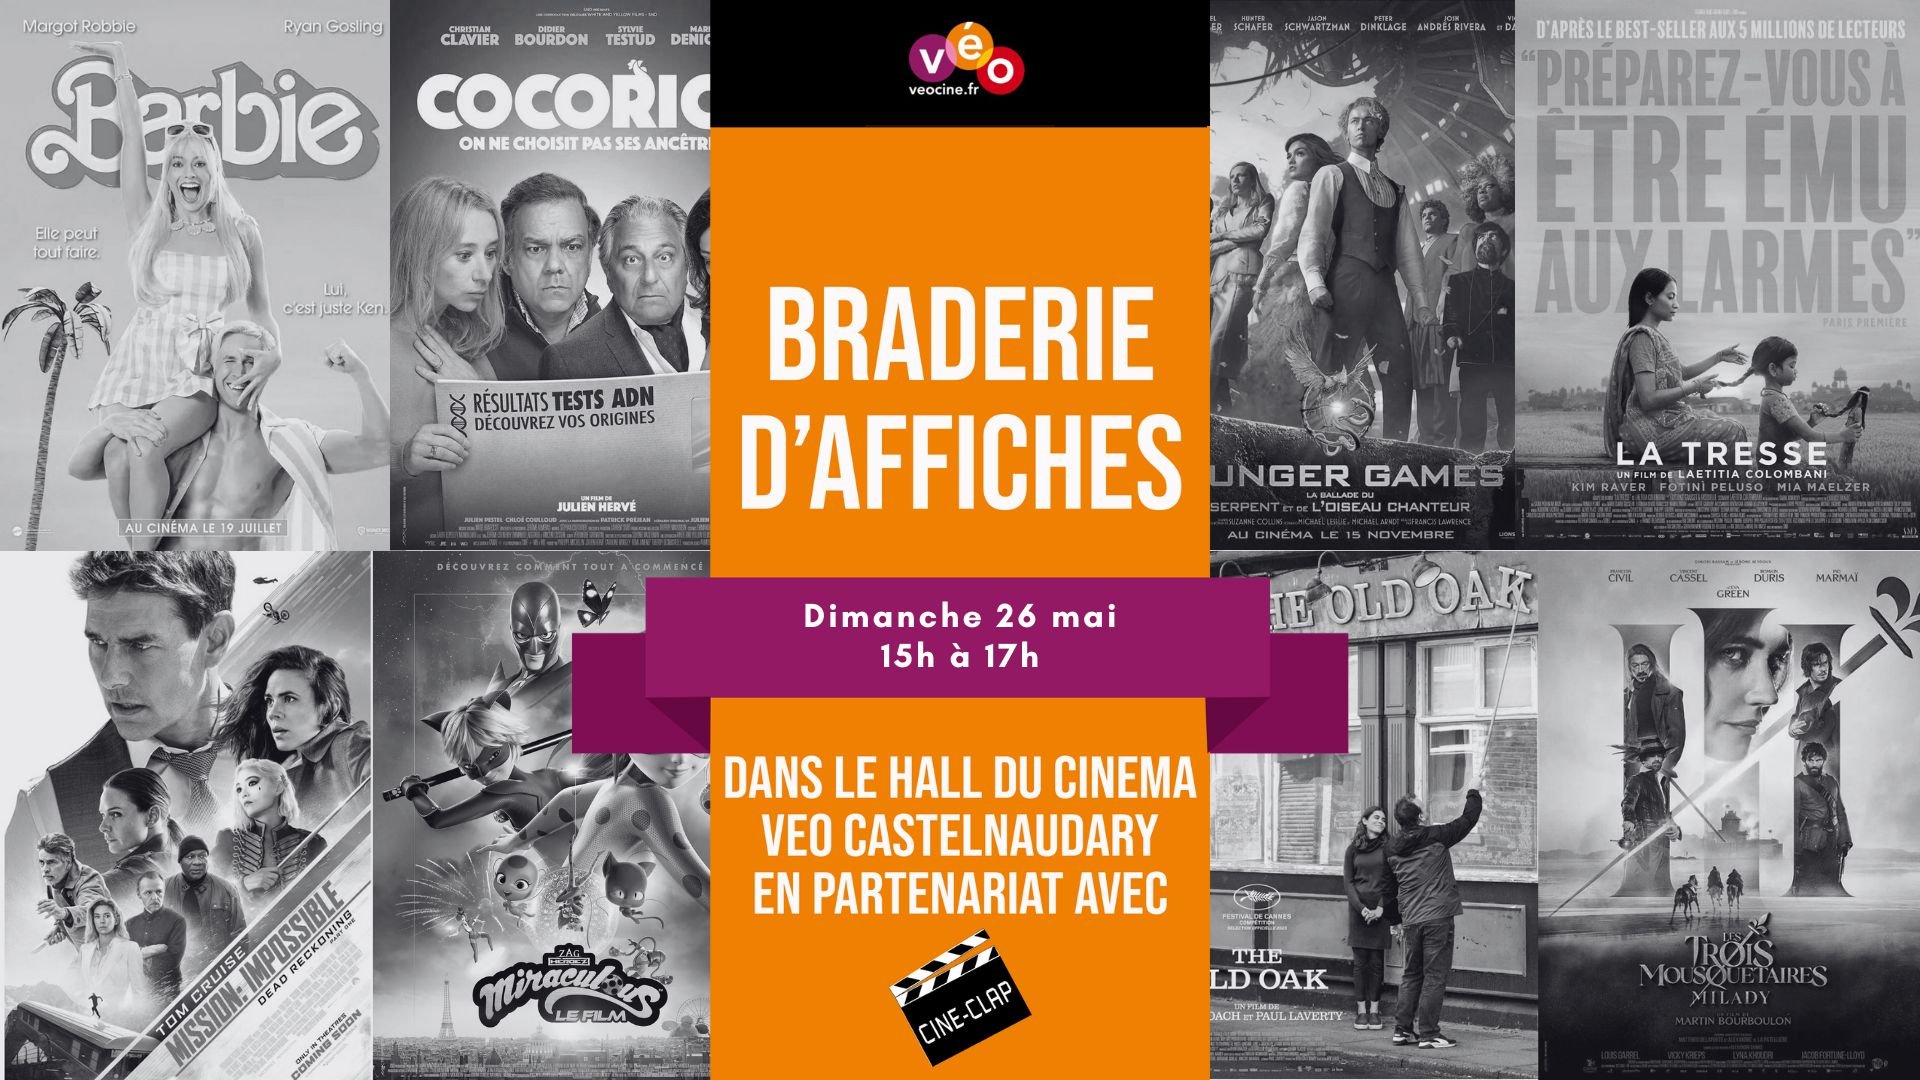 Braderie d'affiches